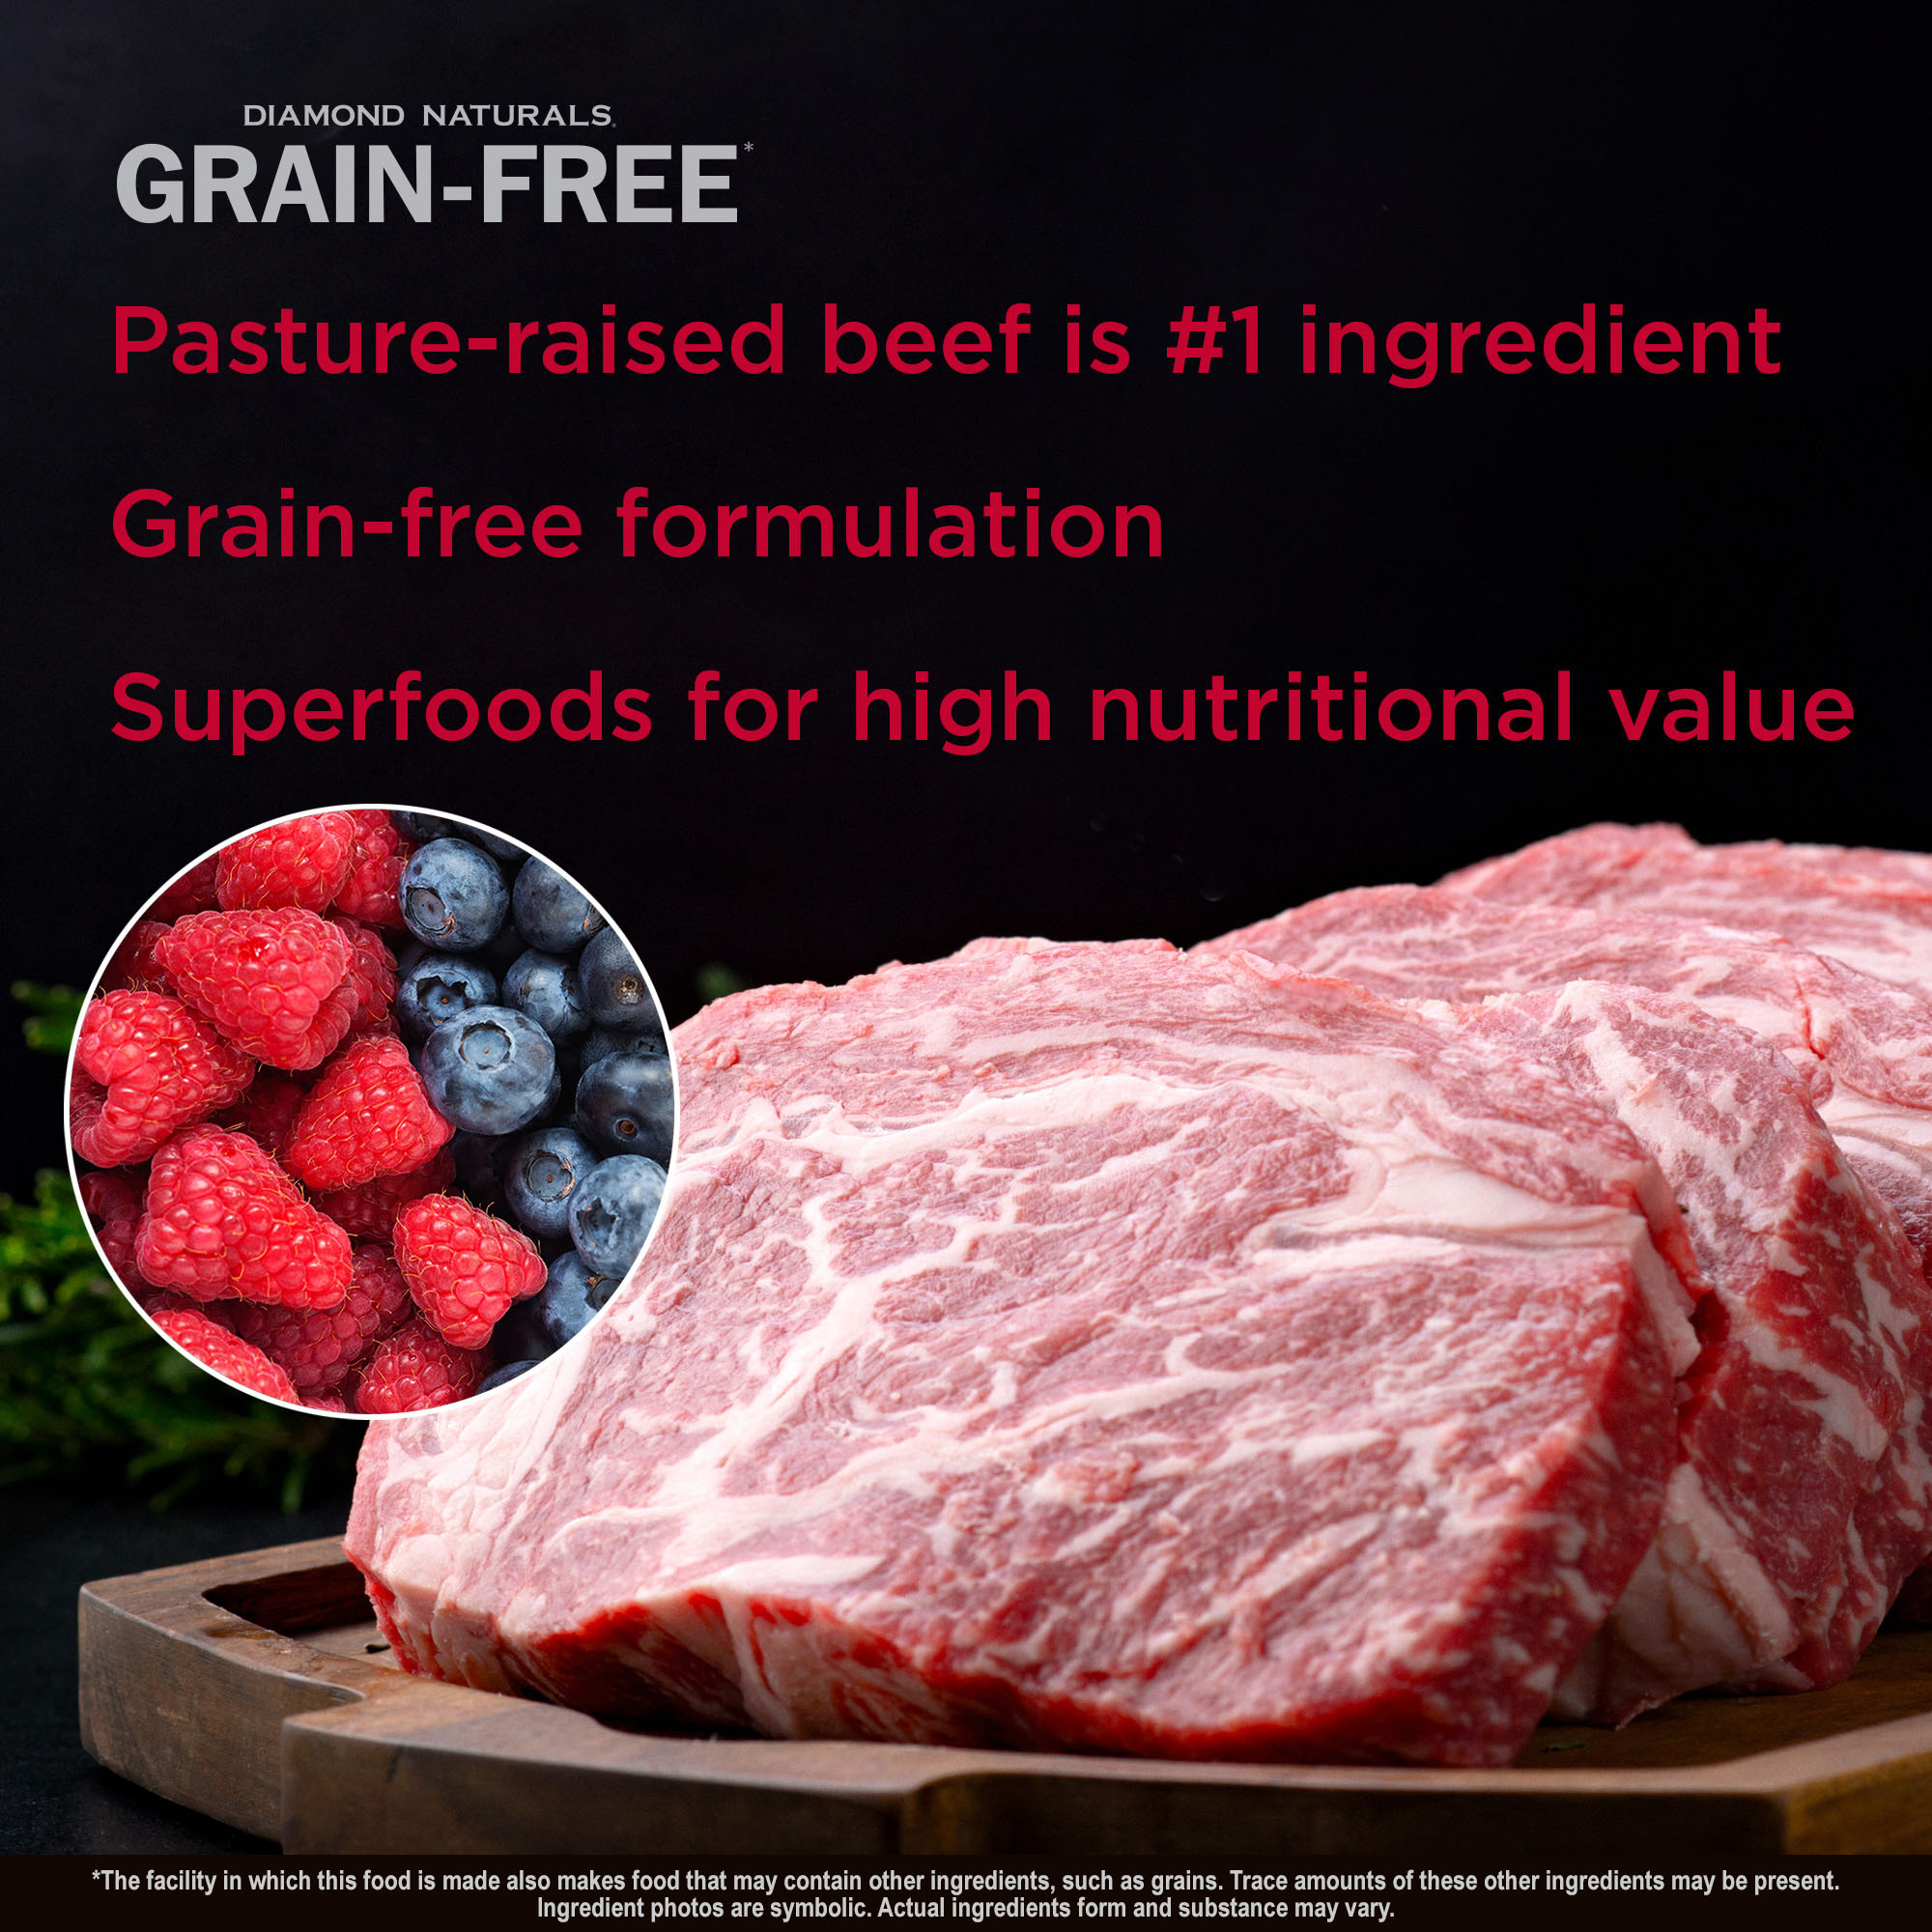 Real Beef on Cutting Board with Raspberries and Blueberries | Diamond Pet Foods